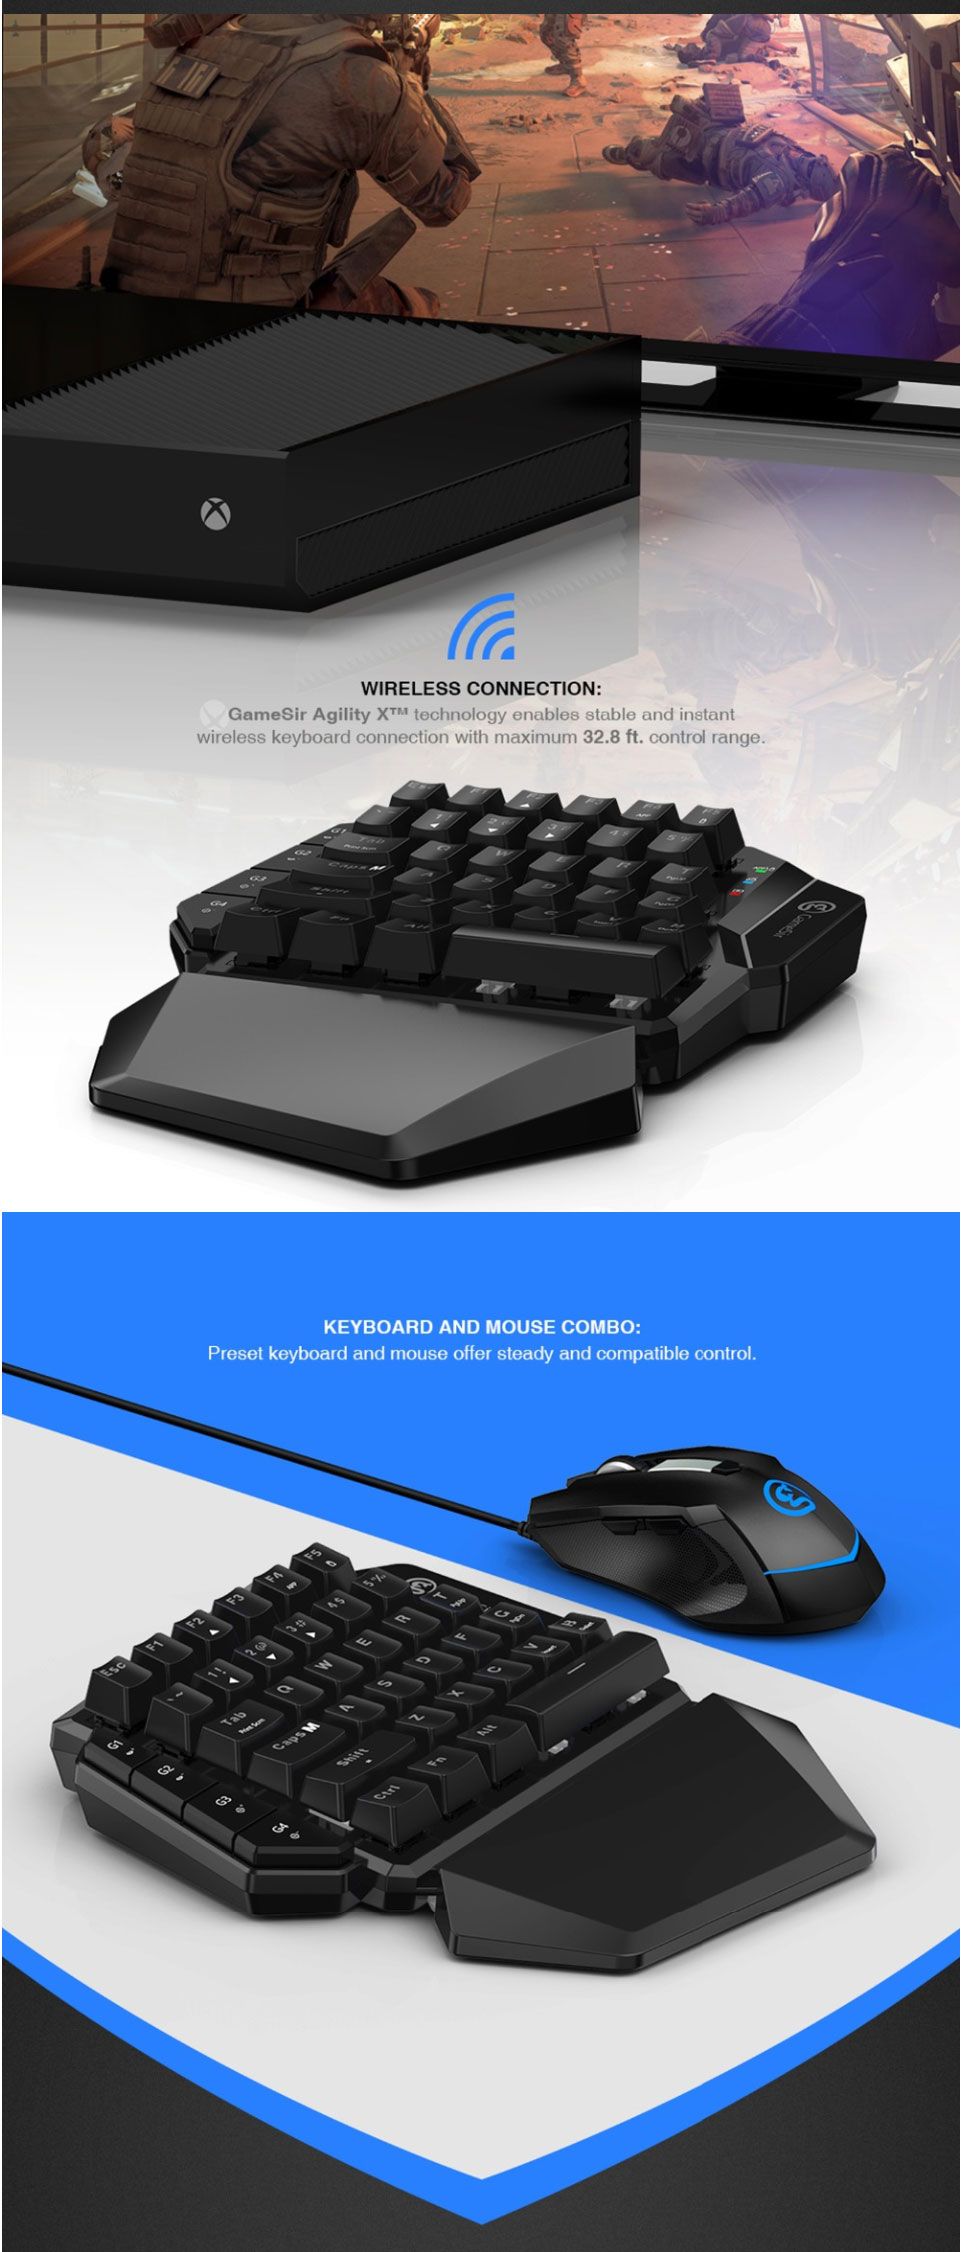 Gamesir-VX-AimSwitch-Keyboard-Mouse-Gamepad-Converter-Single-Hand-Mechanical-Keyboard-For-PS4PS3Xbox-1412000